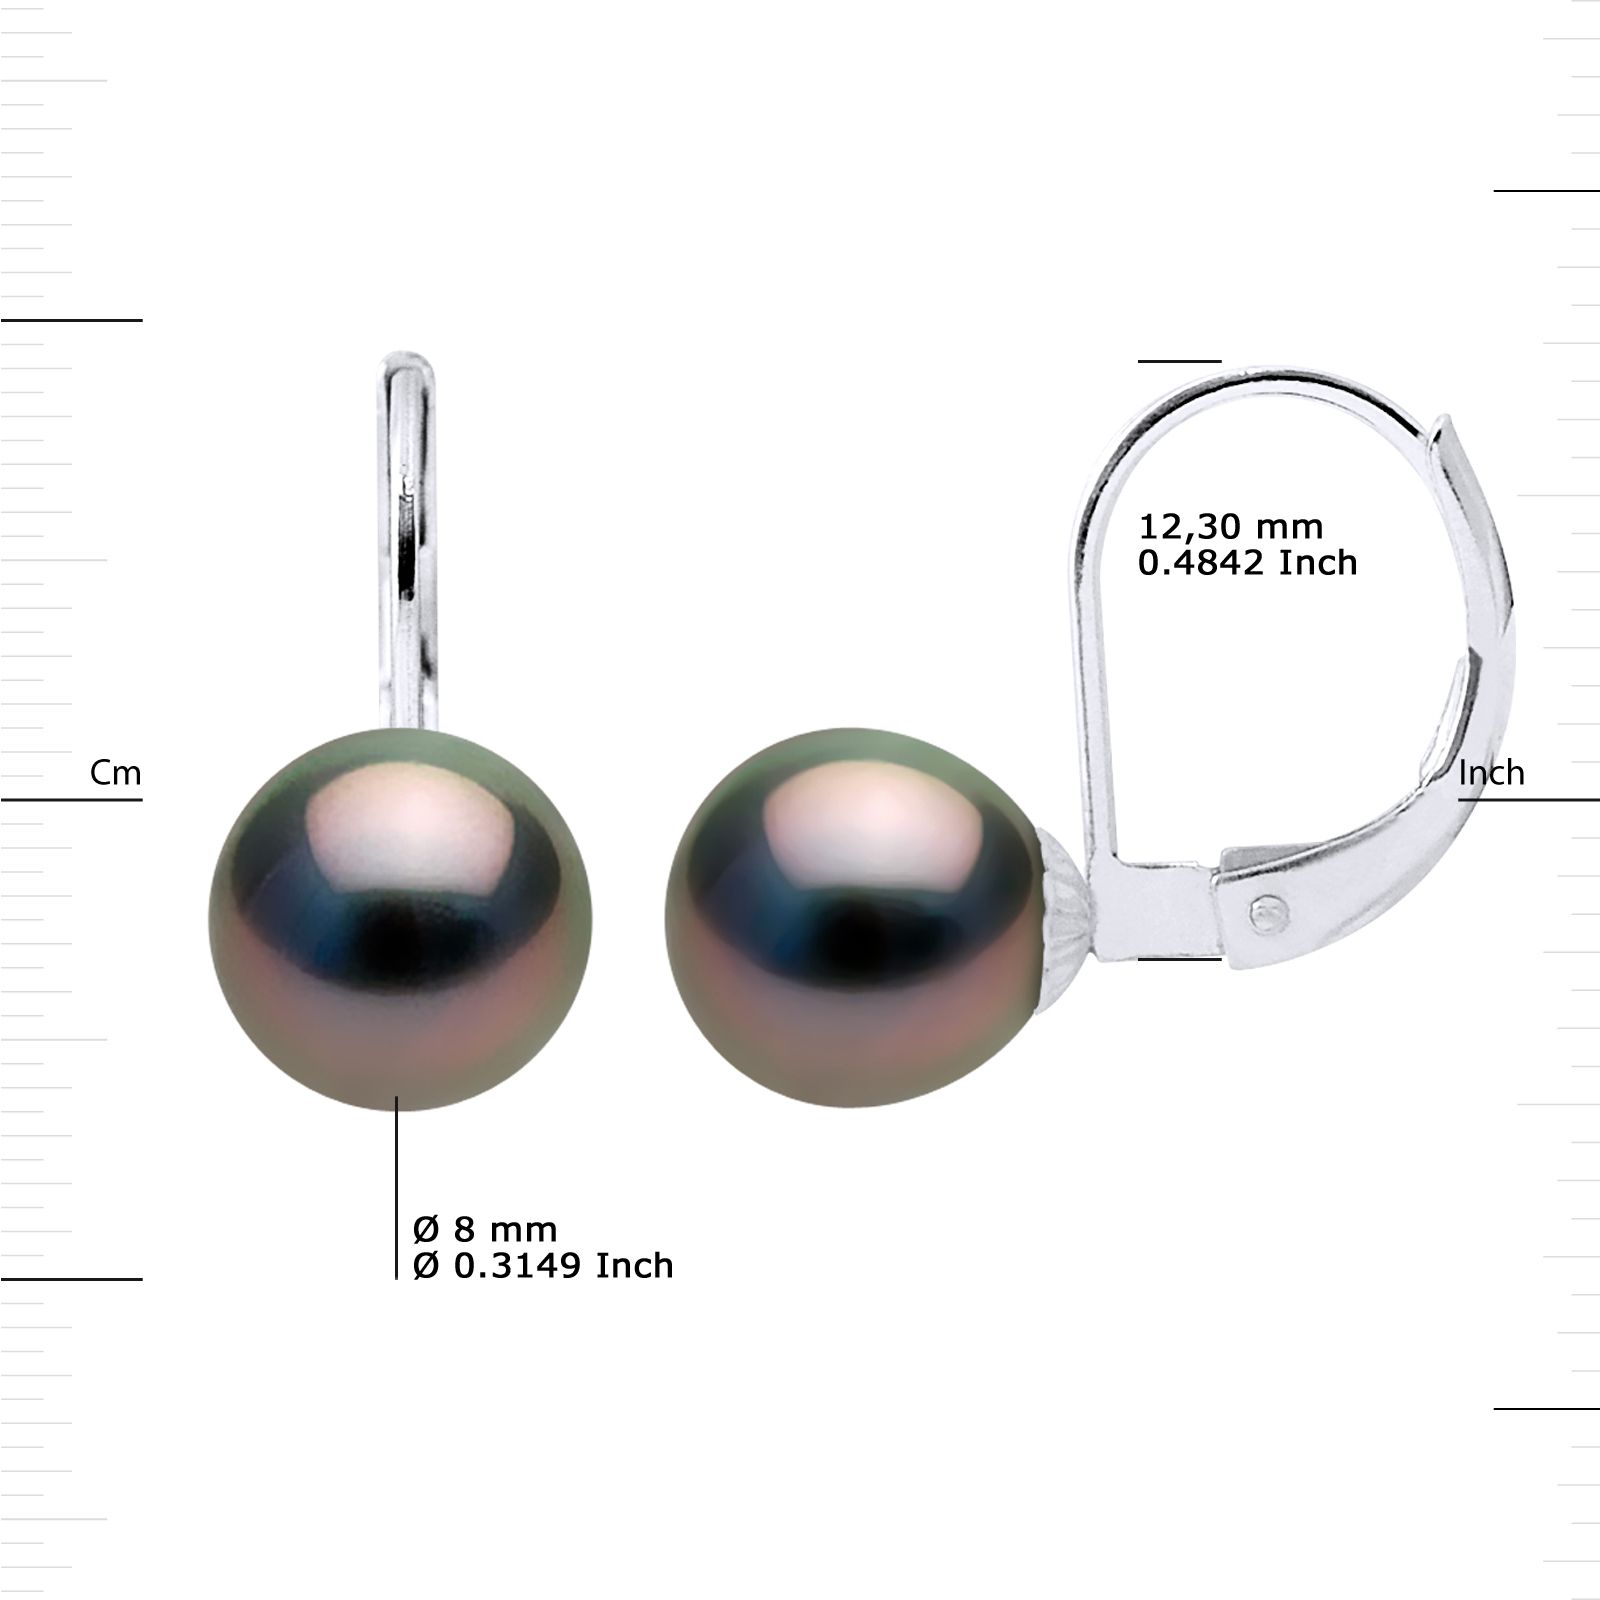 Earrings of 925 Sterling Silver and true Cultured Tahitian Pearl Pear Shape 8-9 mm , 0,31 in Sleeper System - Our jewellery is made in France and will be delivered in a gift box accompanied by a Certificate of Authenticity and International Warranty